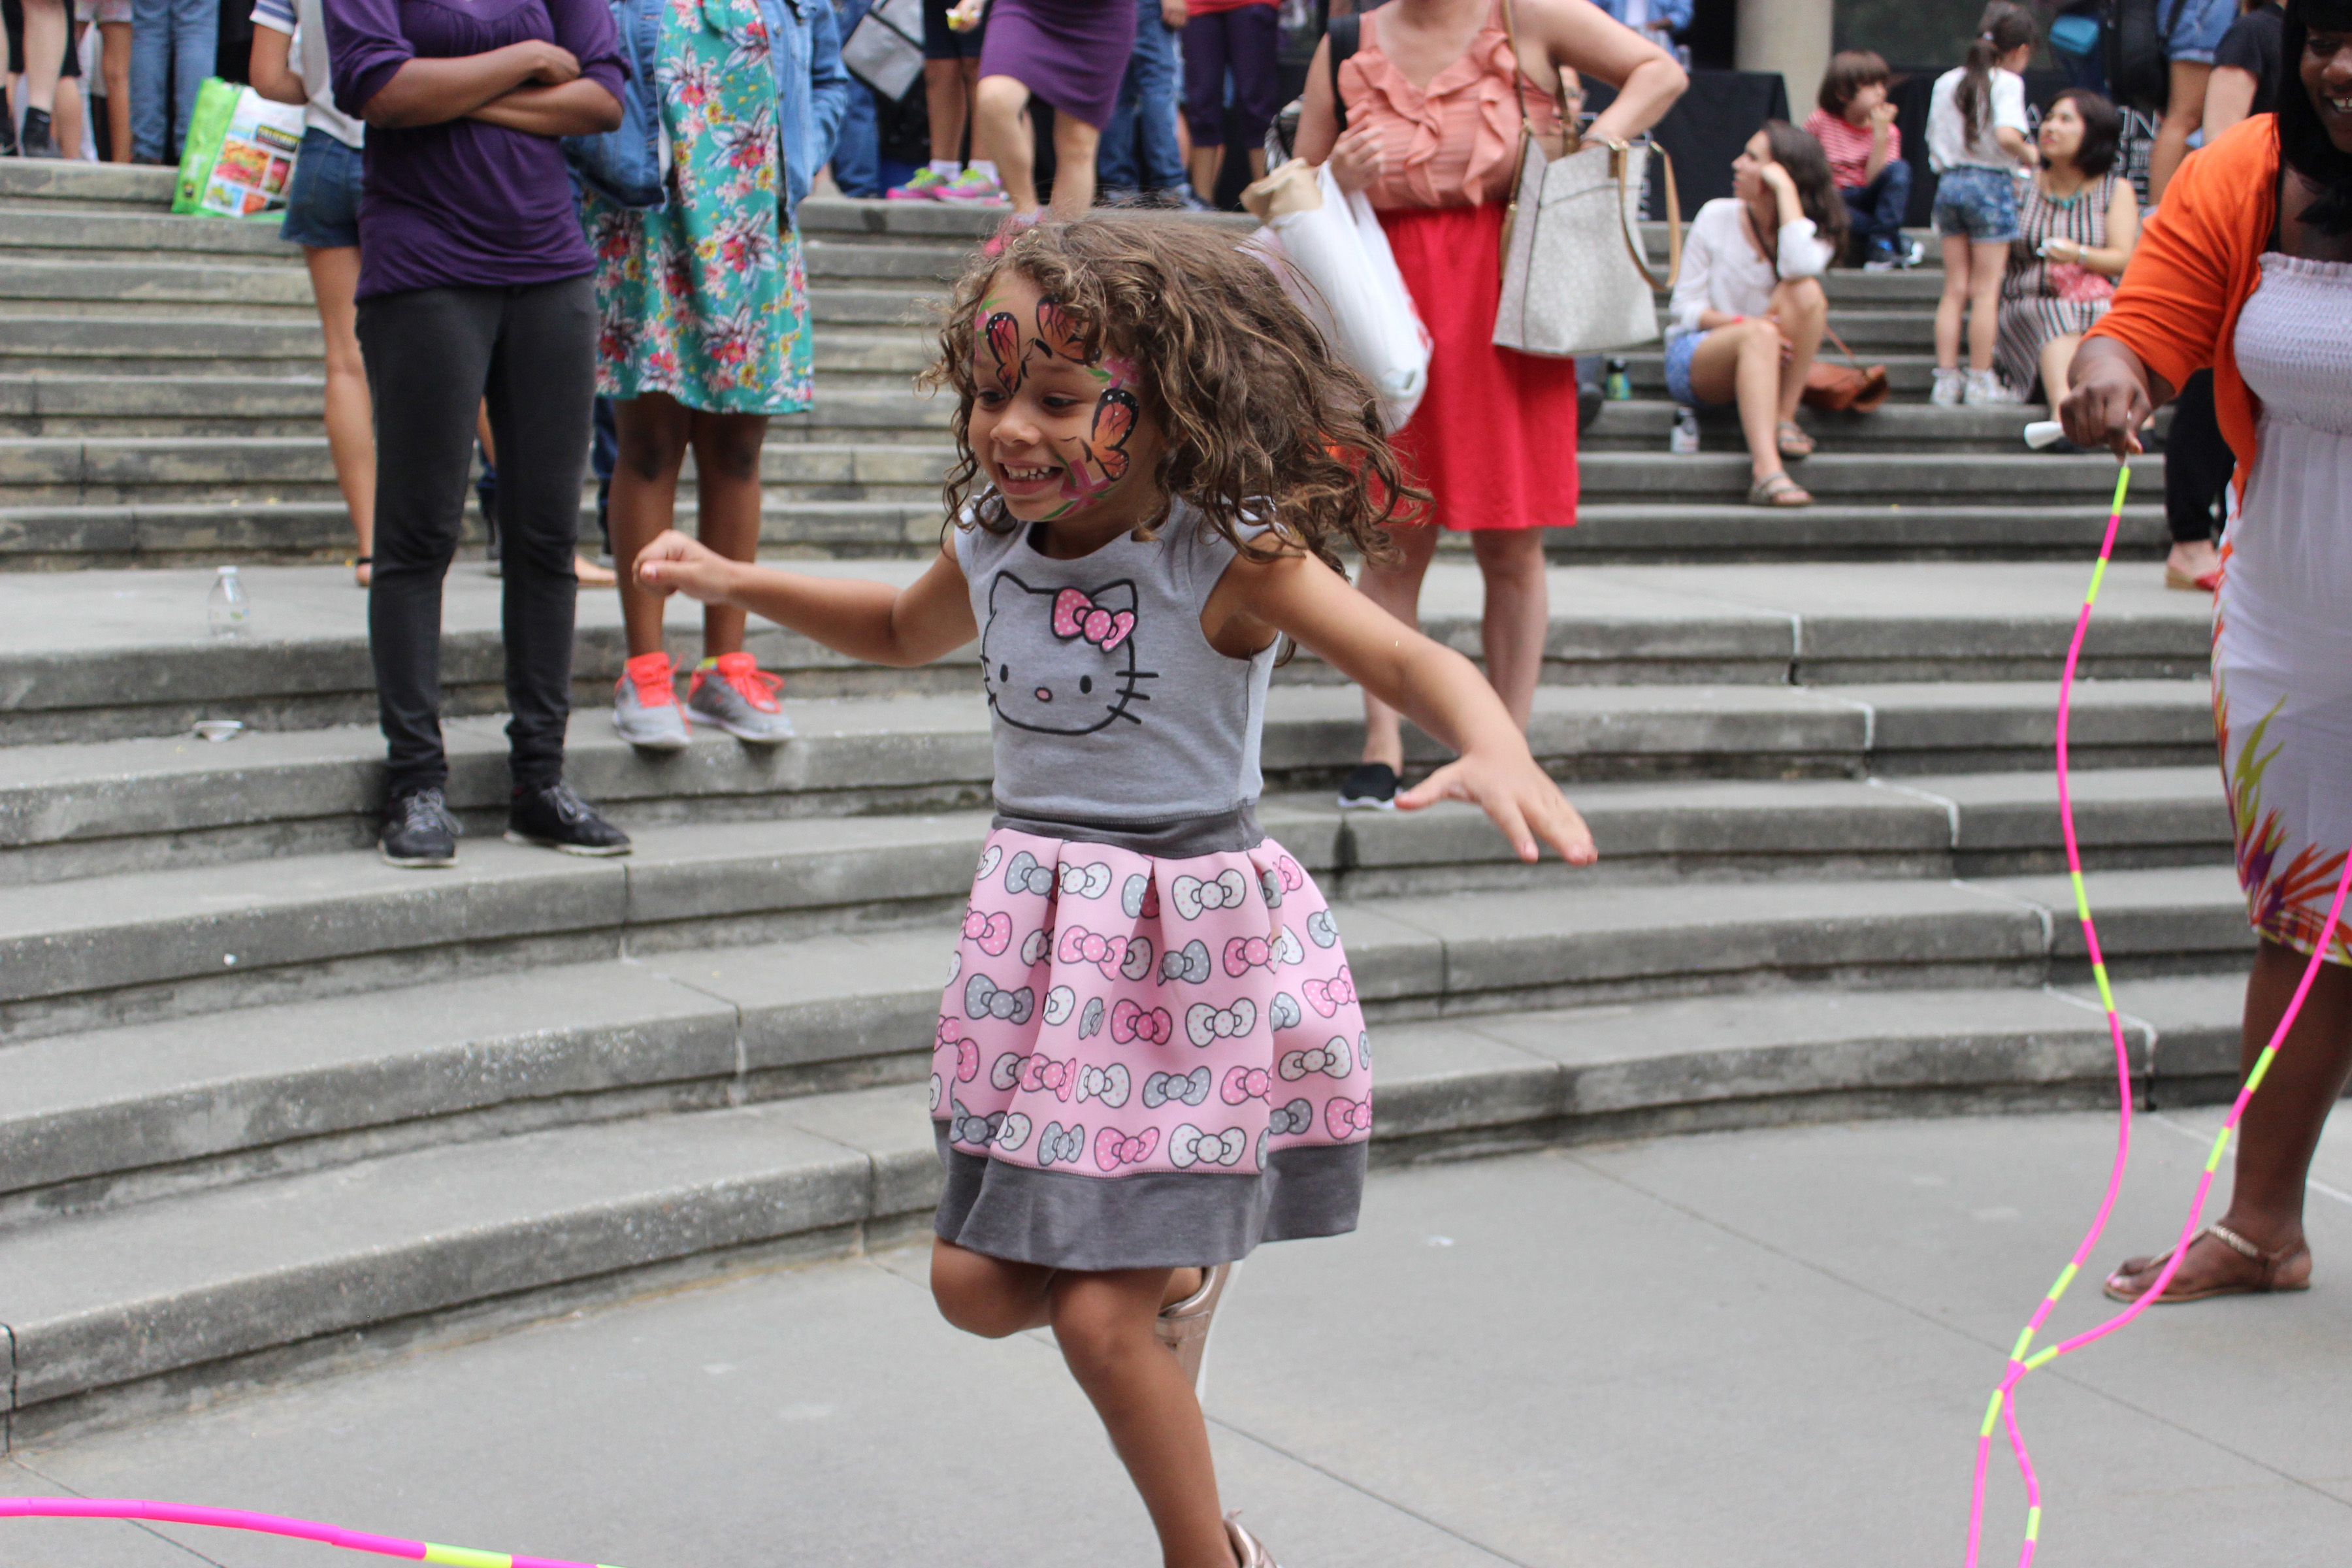 Little girl jump roping and enjoying Community Day at Abrons Arts Center, summer 2017